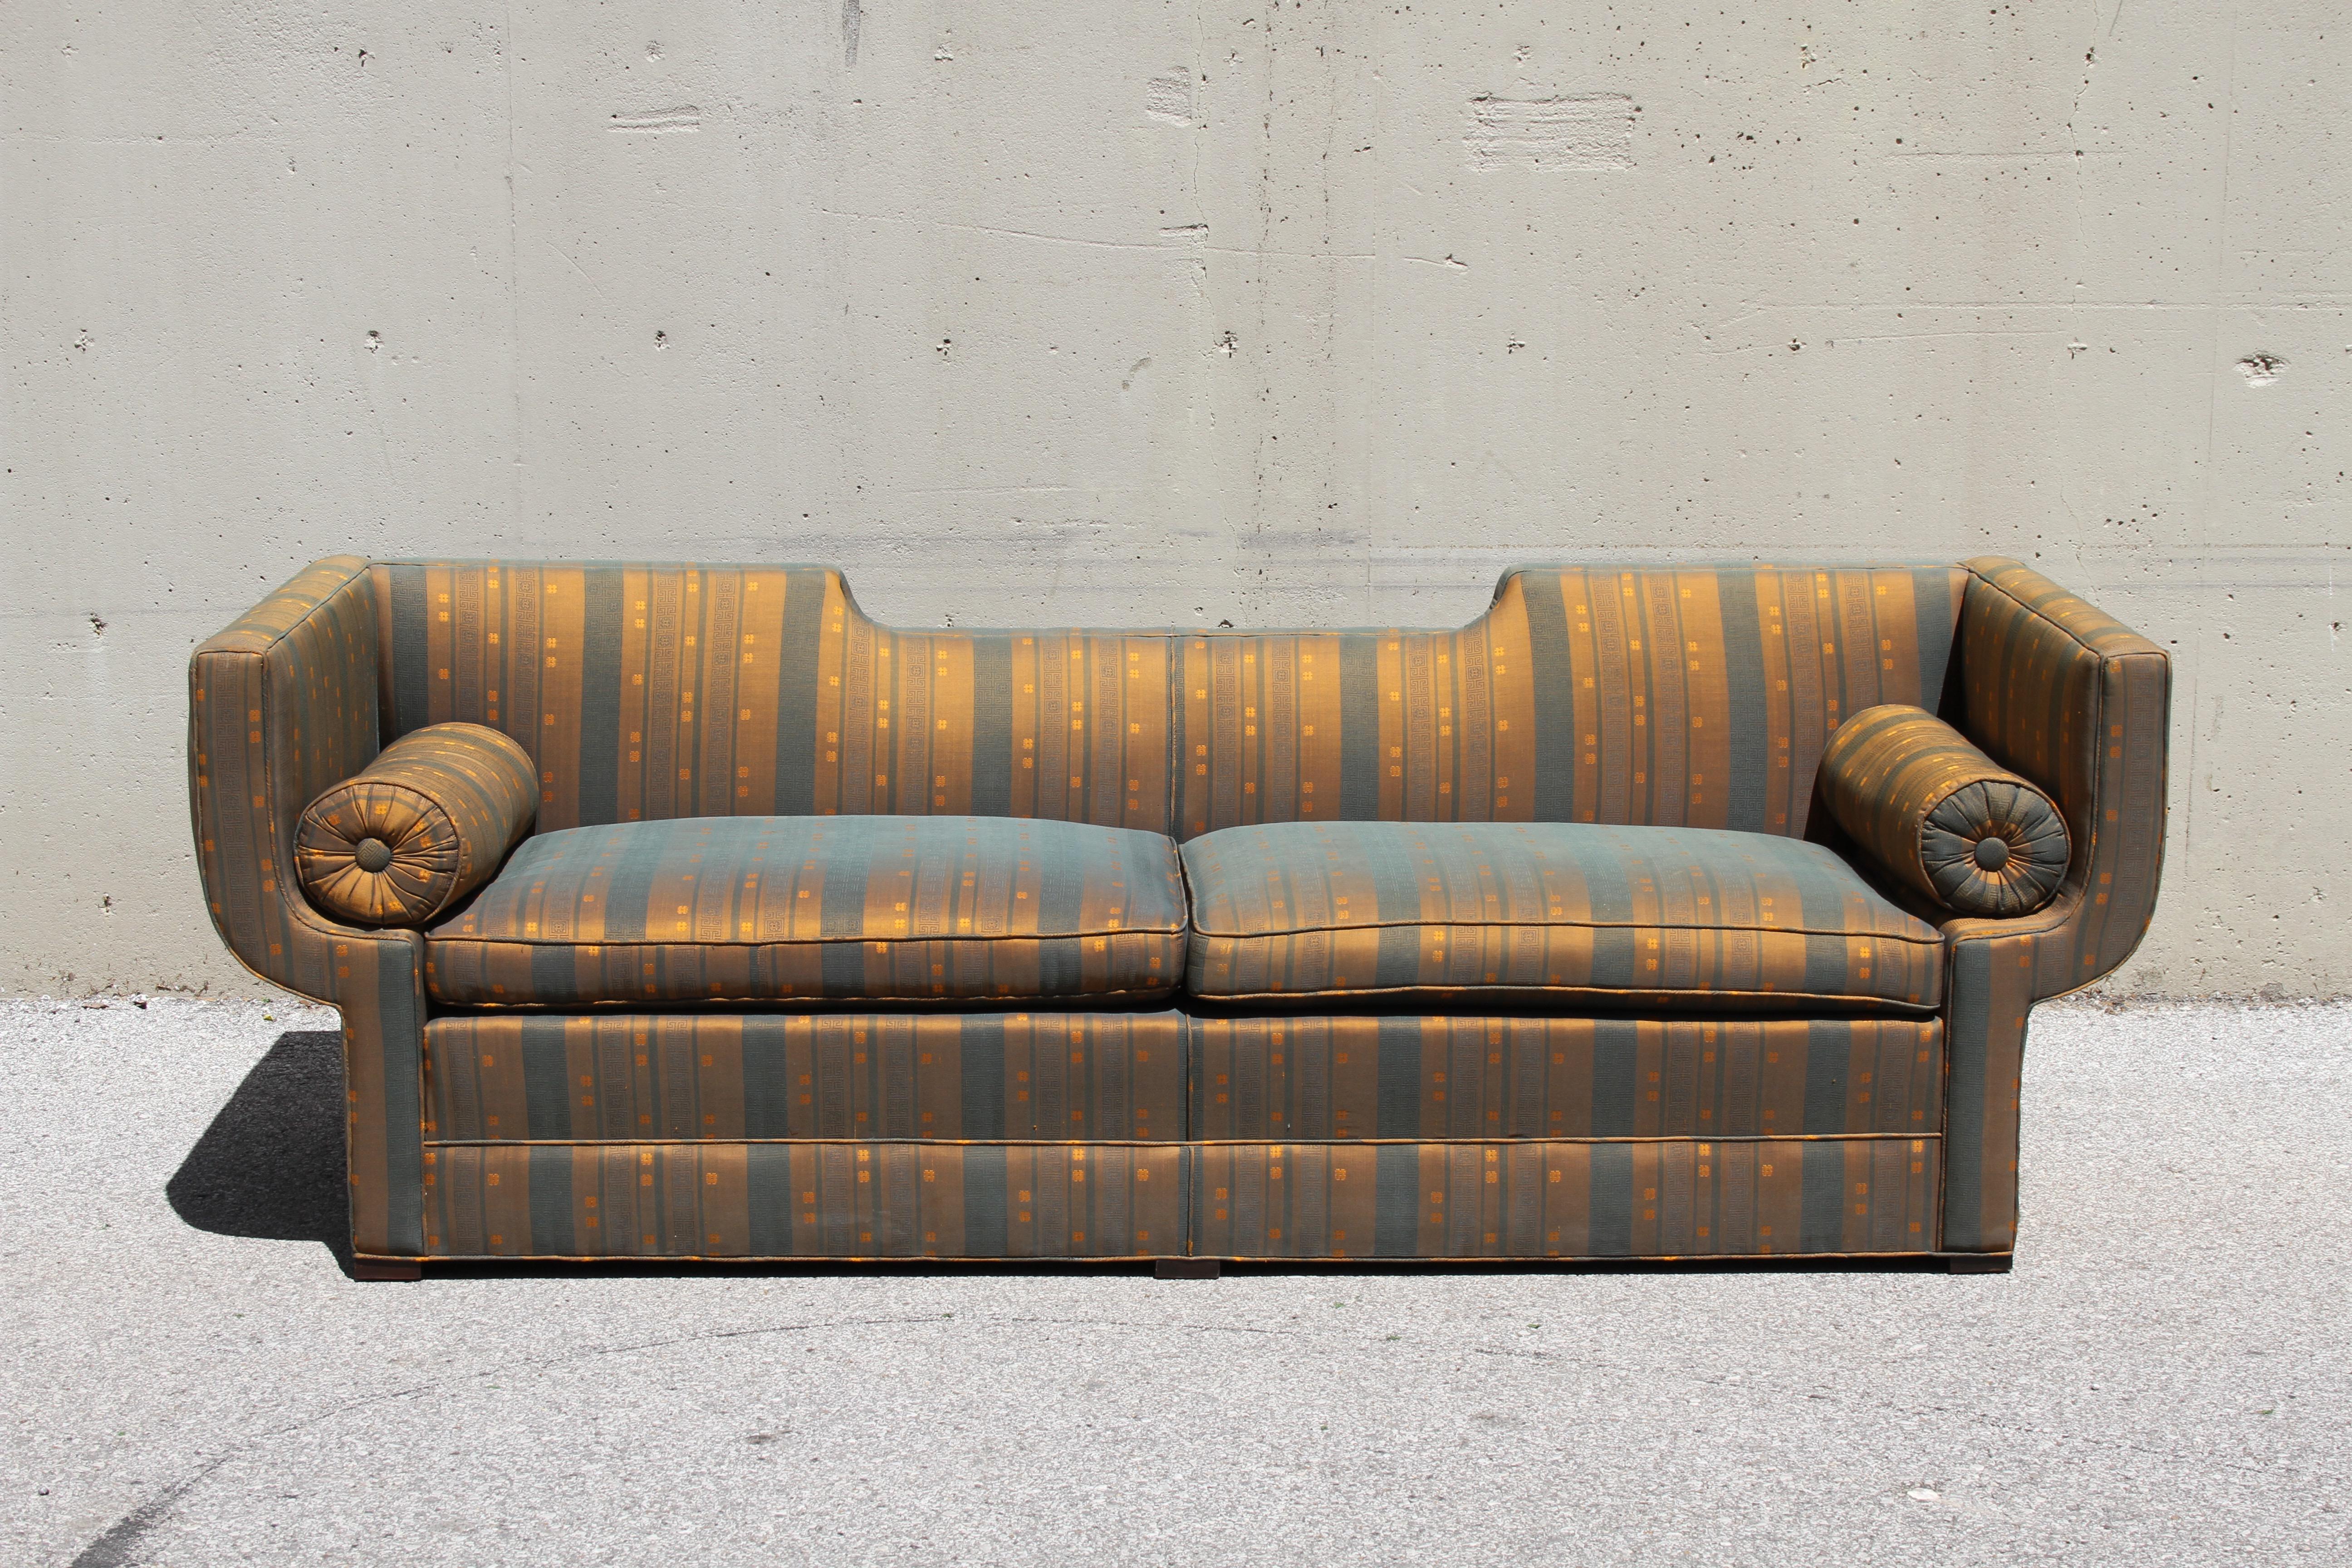 Rare Baker Furniture Co. sculptural Gondola sofa with original striped silk fabric, circa 1960. This elegant sofa is from a one owner estate of an artist, that was filled with Baker, Harvey Probber, Kelvin & Laverne and other midcentury furniture.